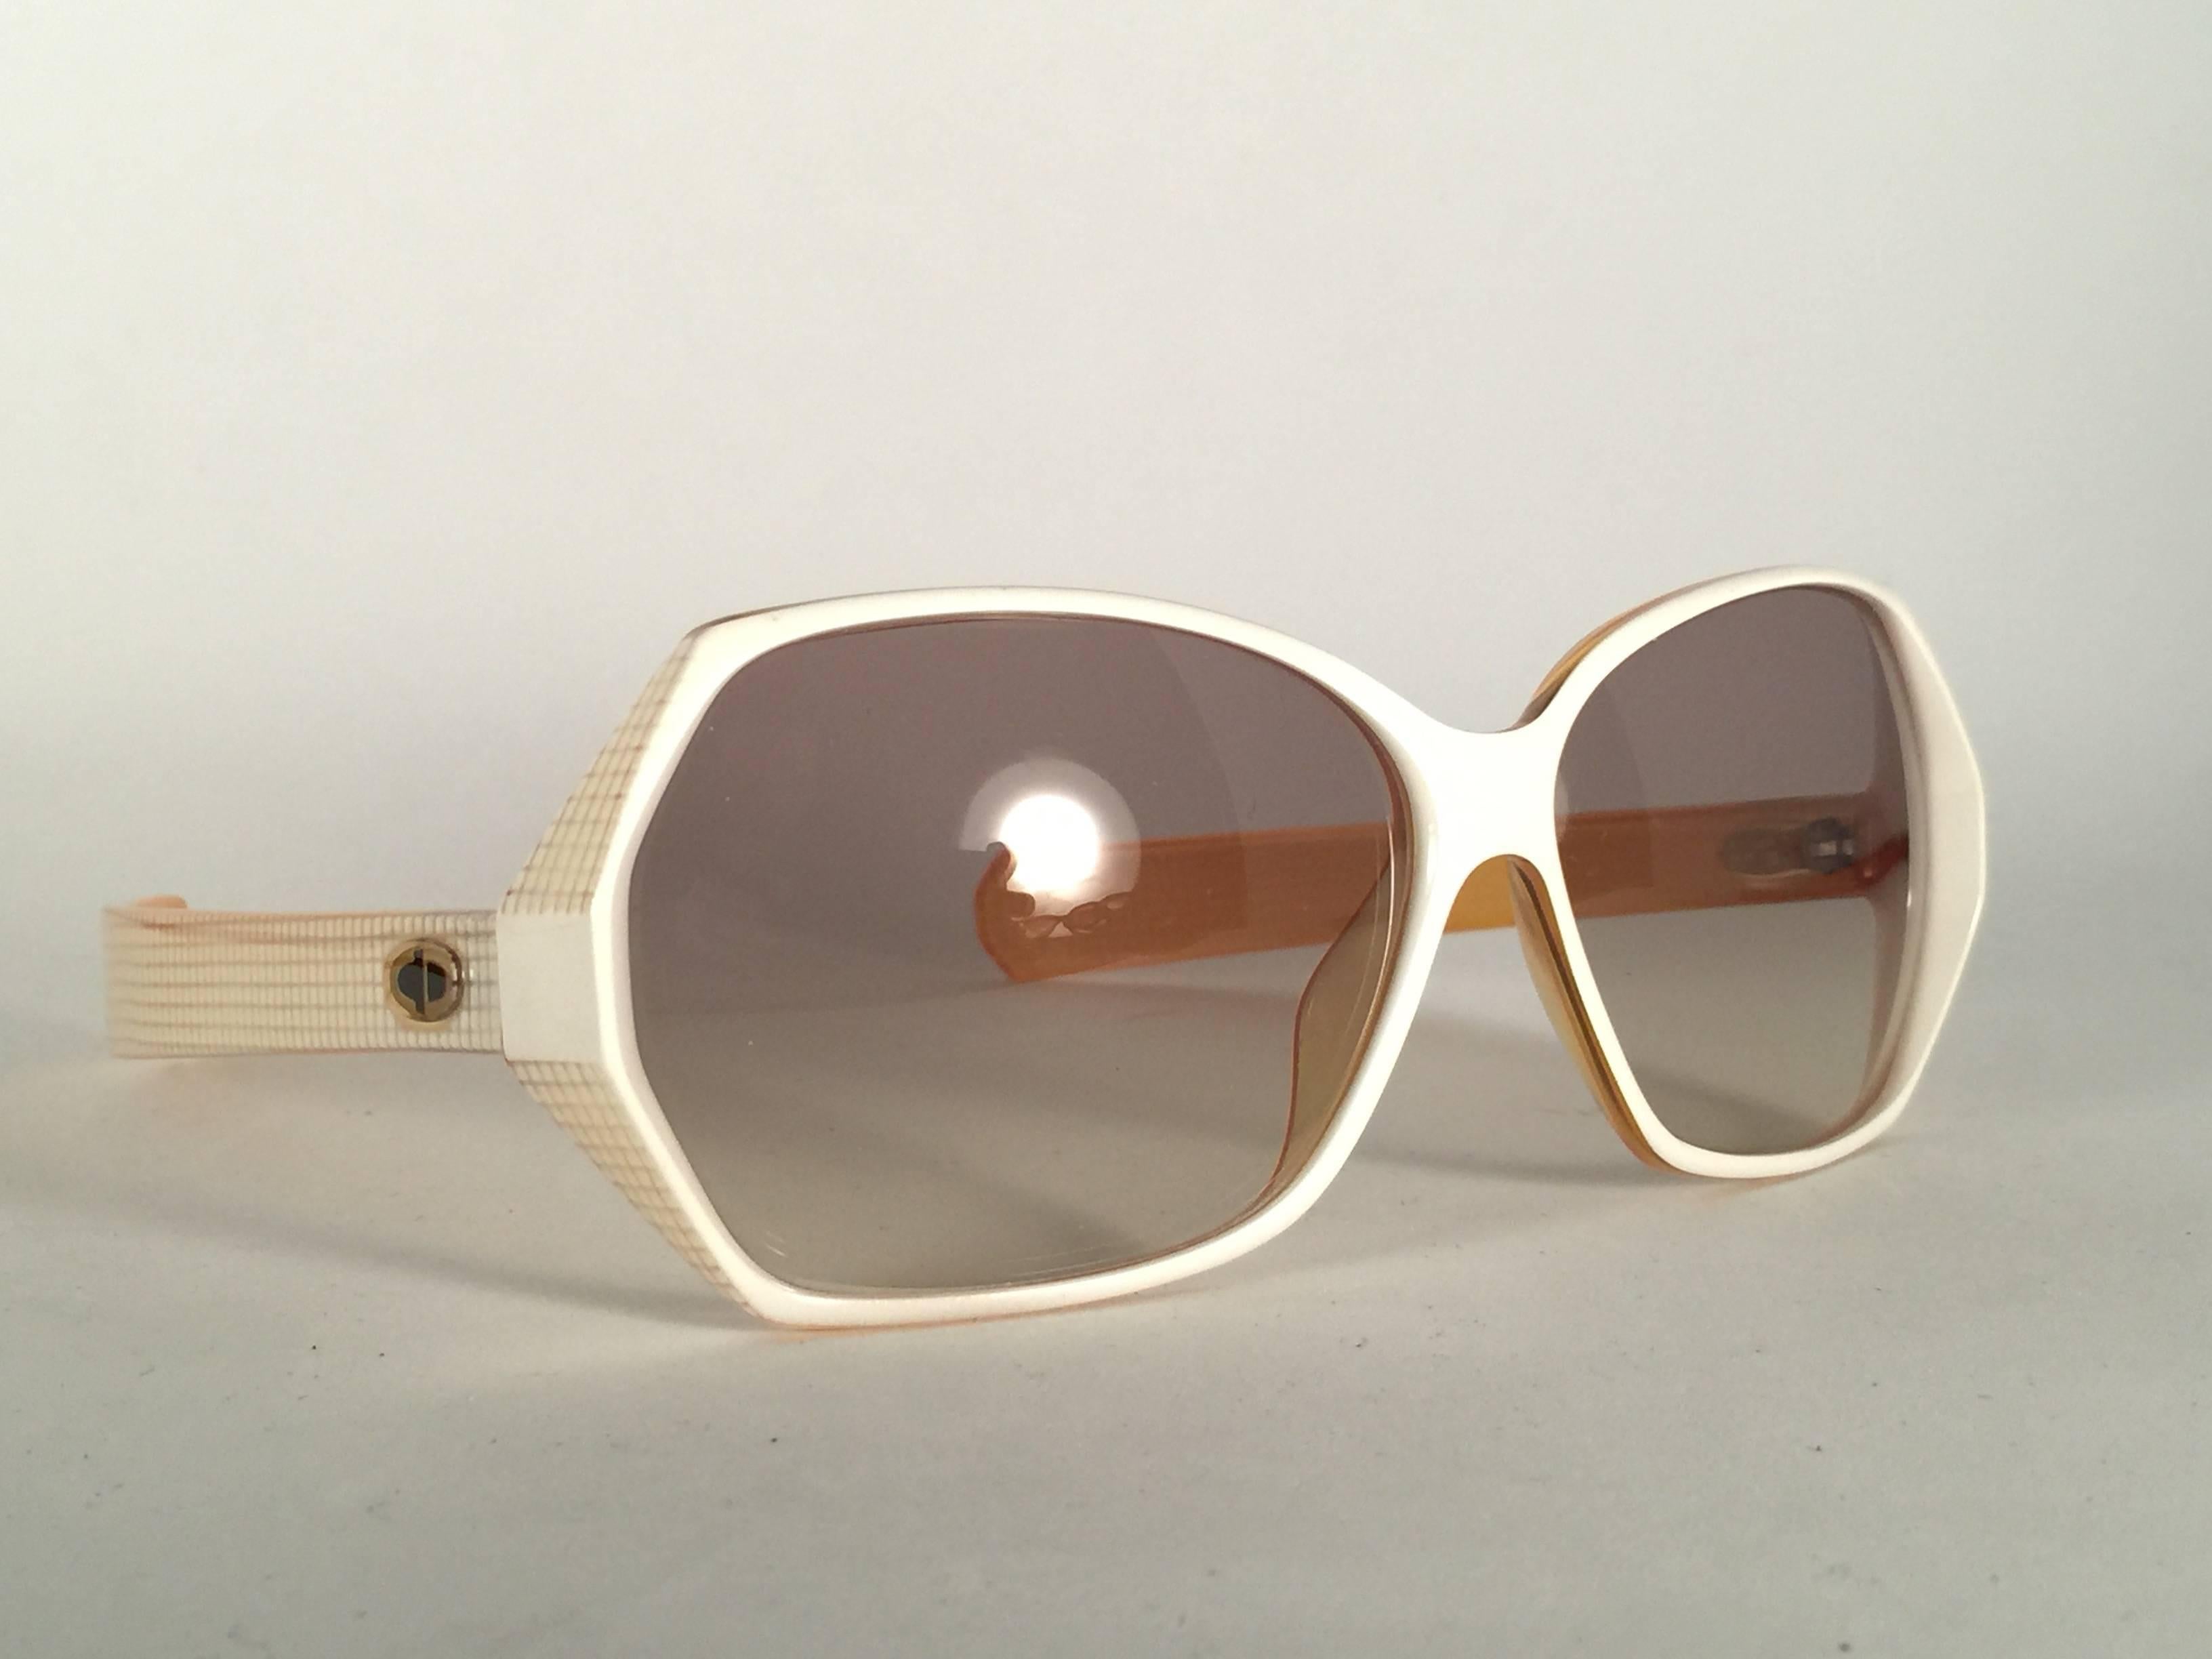 New Vintage Christian Dior 2177 White Origami frame with spotless light brown gradient lenses. 

Made in Germany.
 
Produced and design in 1970's.

A collector’s piece!

New, never worn or displayed. Comes with its original silver Christian Dior